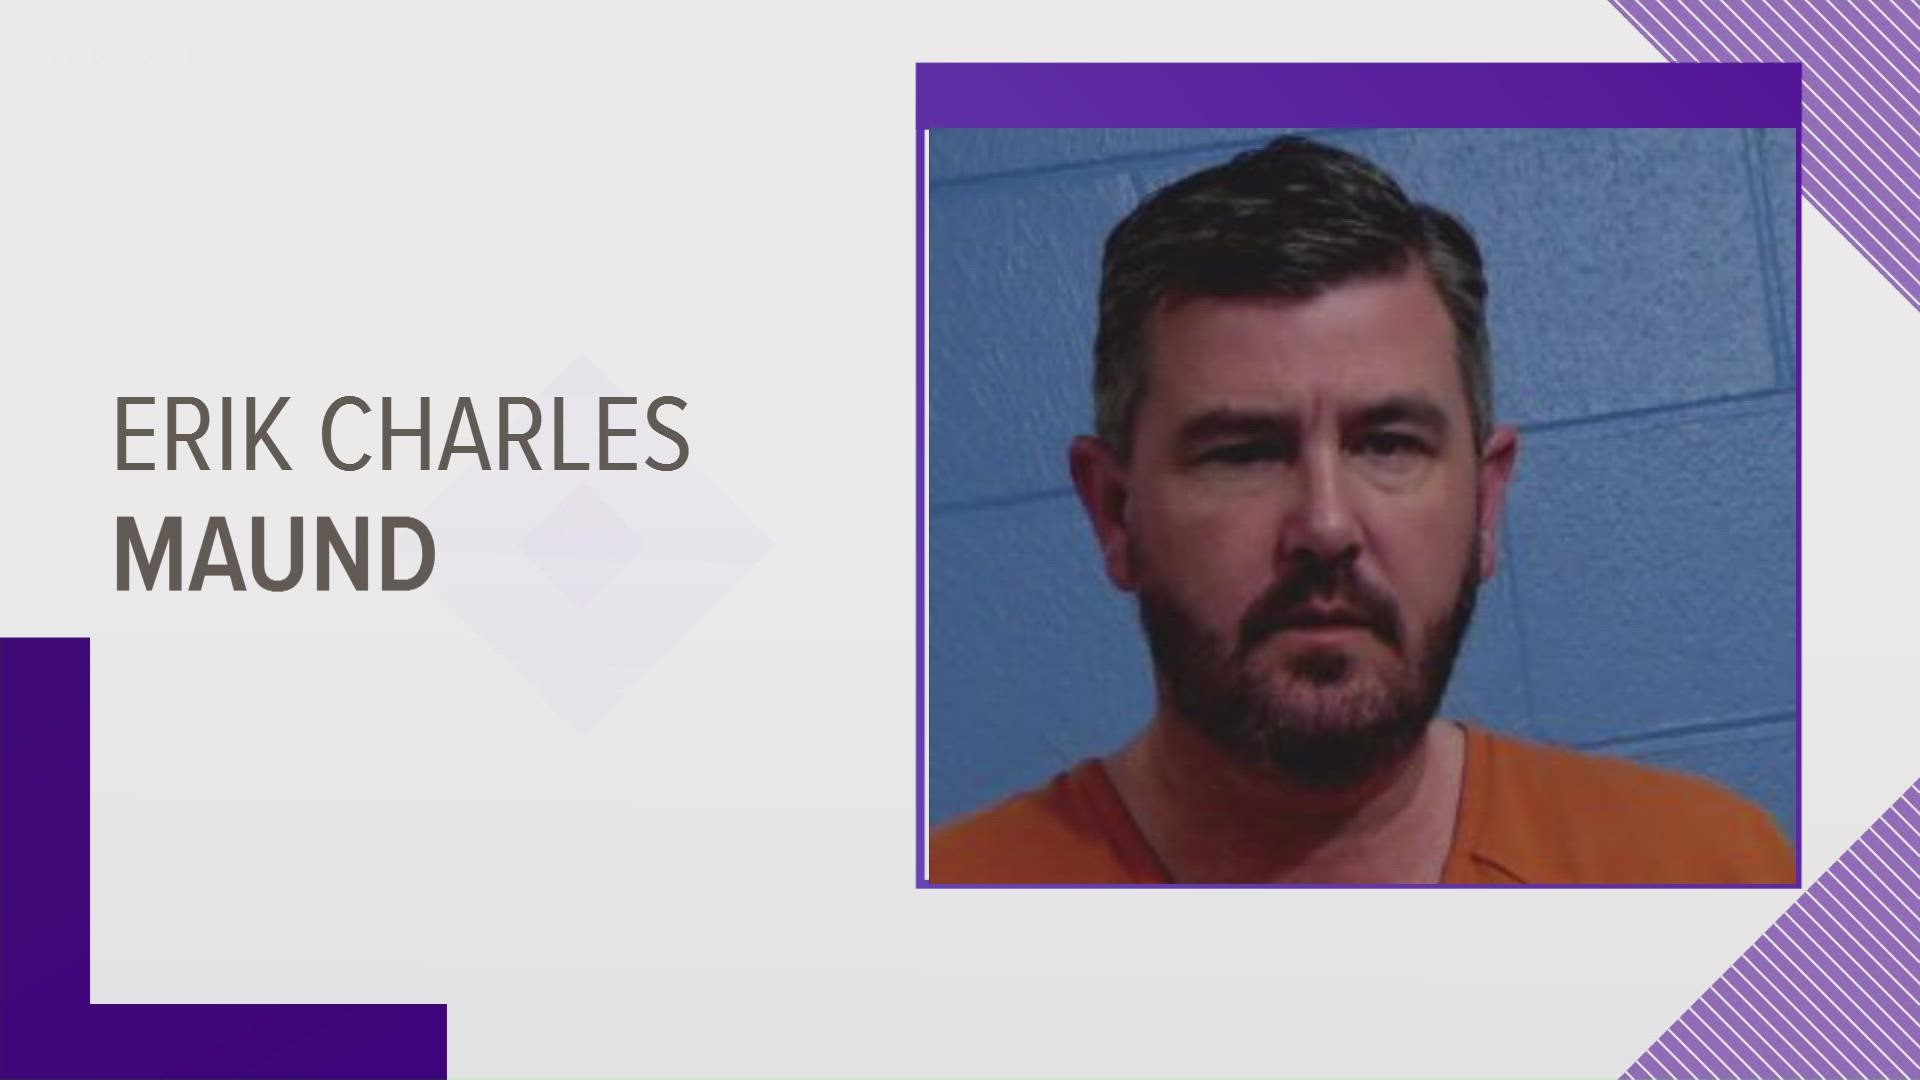 Erik Charles Maund and three other men are facing a federal indictment in connection with the deaths of an estranged couple in Tennessee.